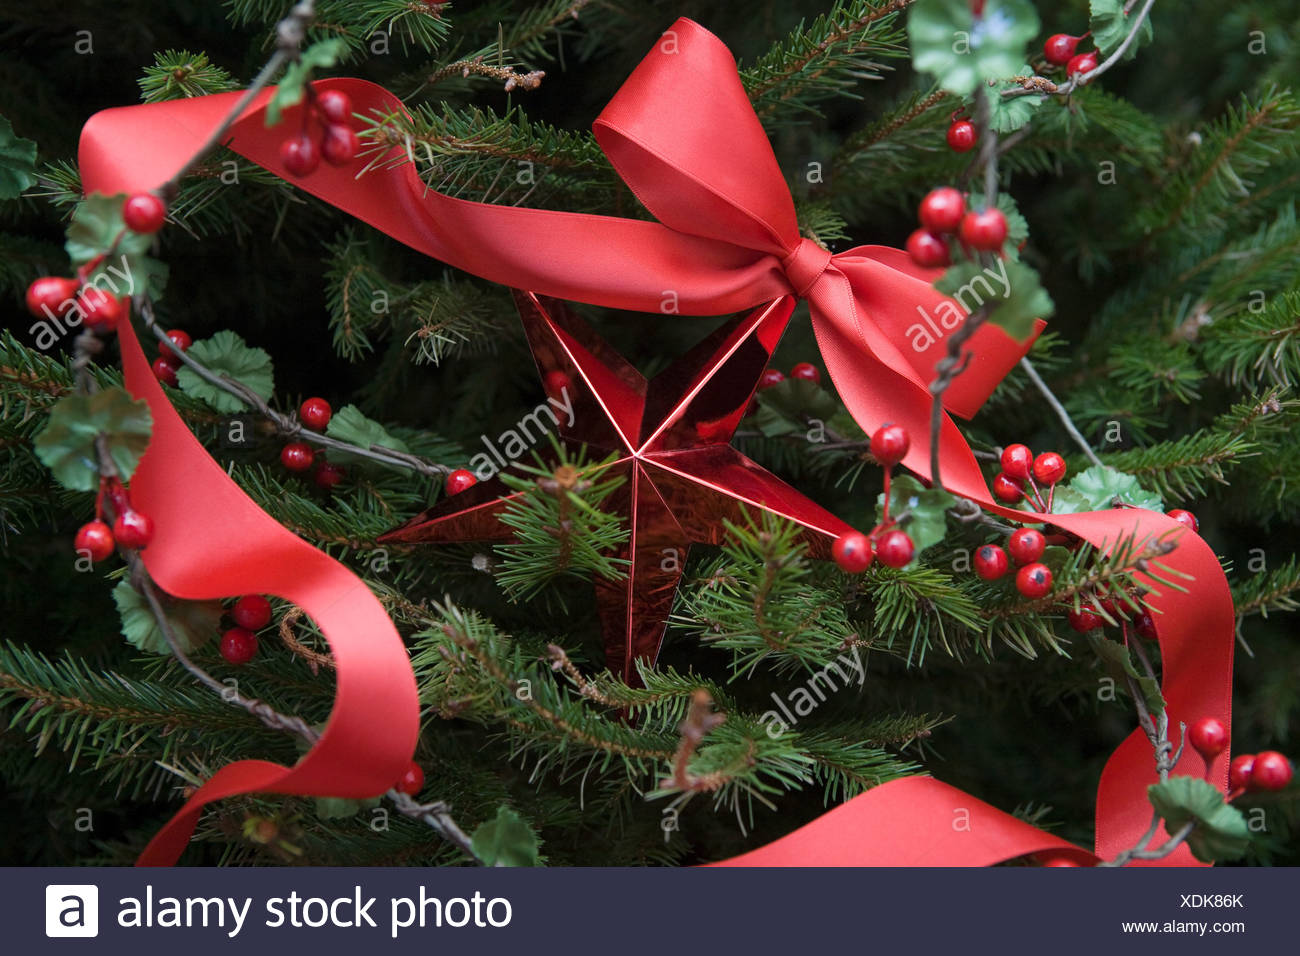 Christmas decorations on a tree Stock Image